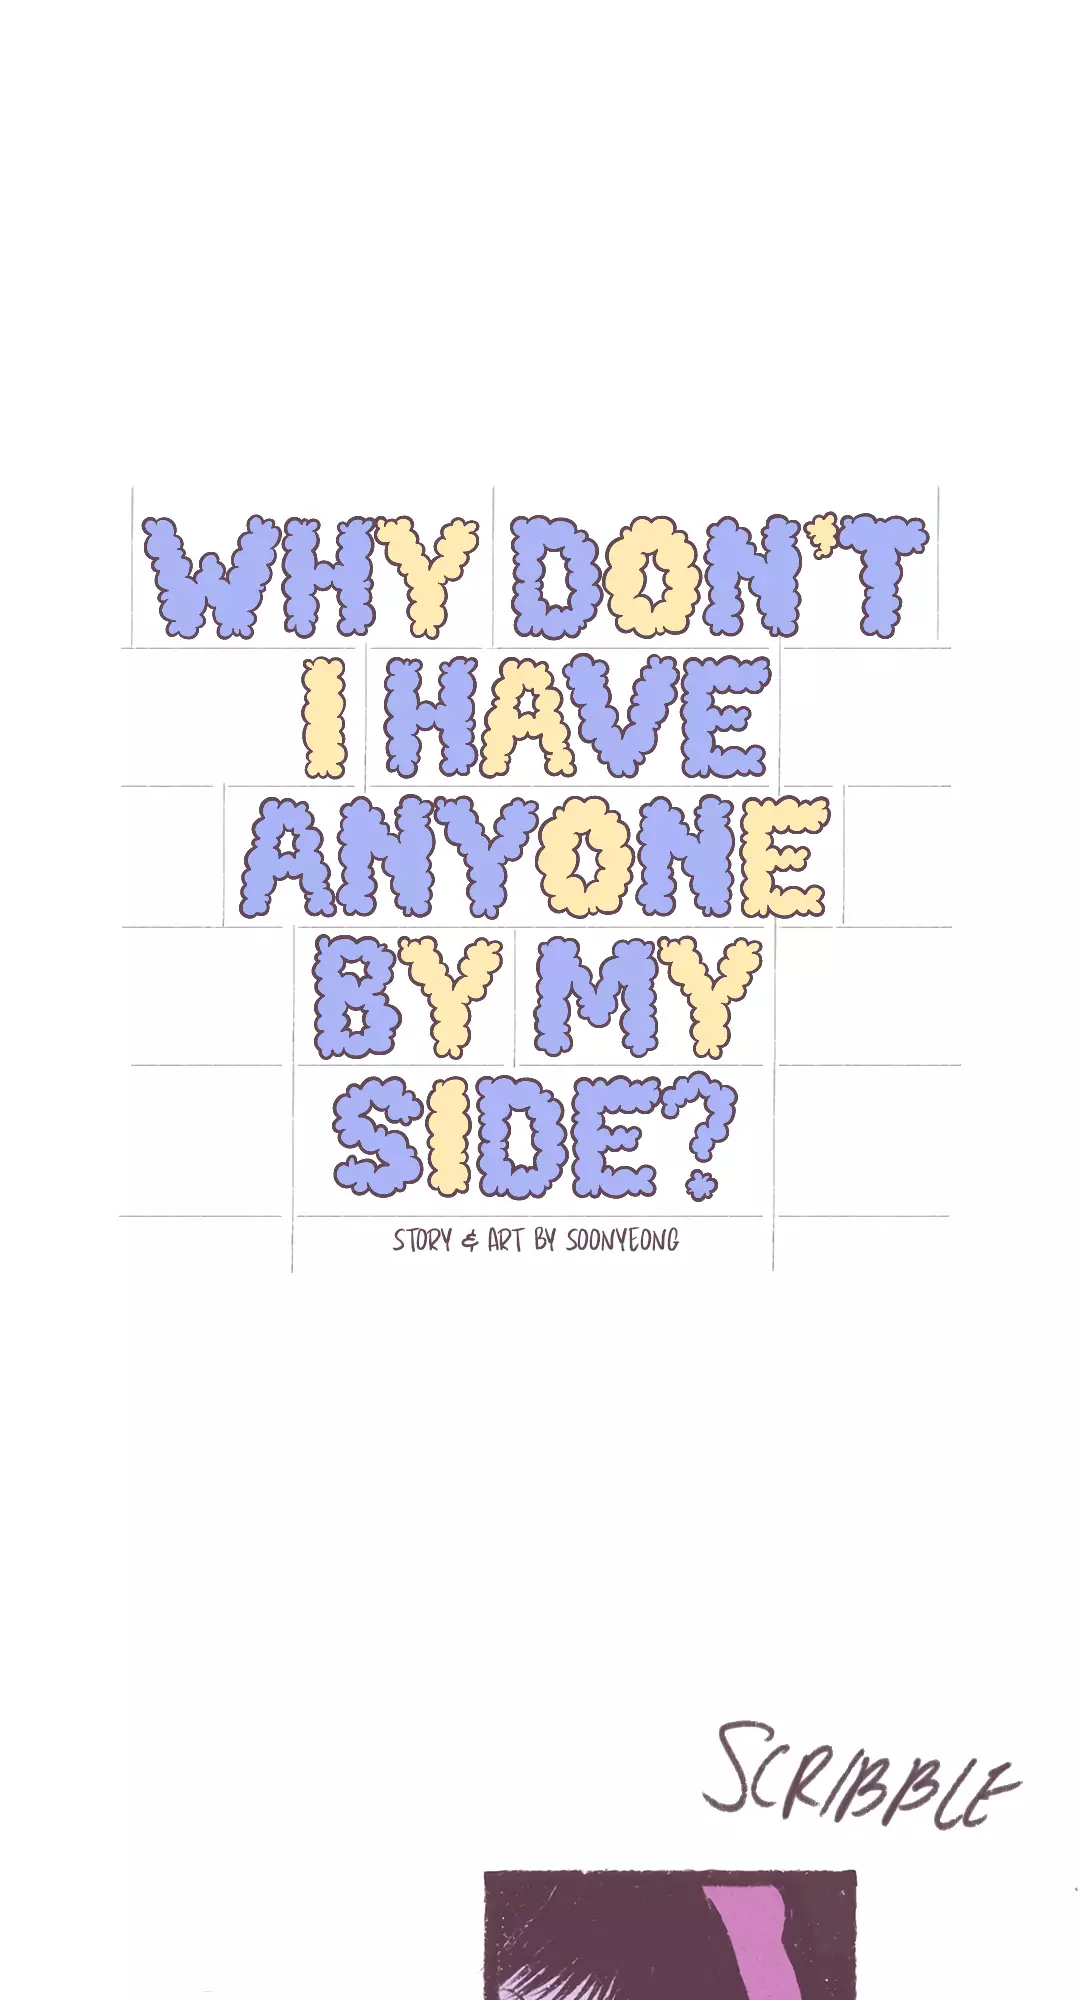 Why Don't I Have Anyone By My Side? - 3 page 3-2516b914